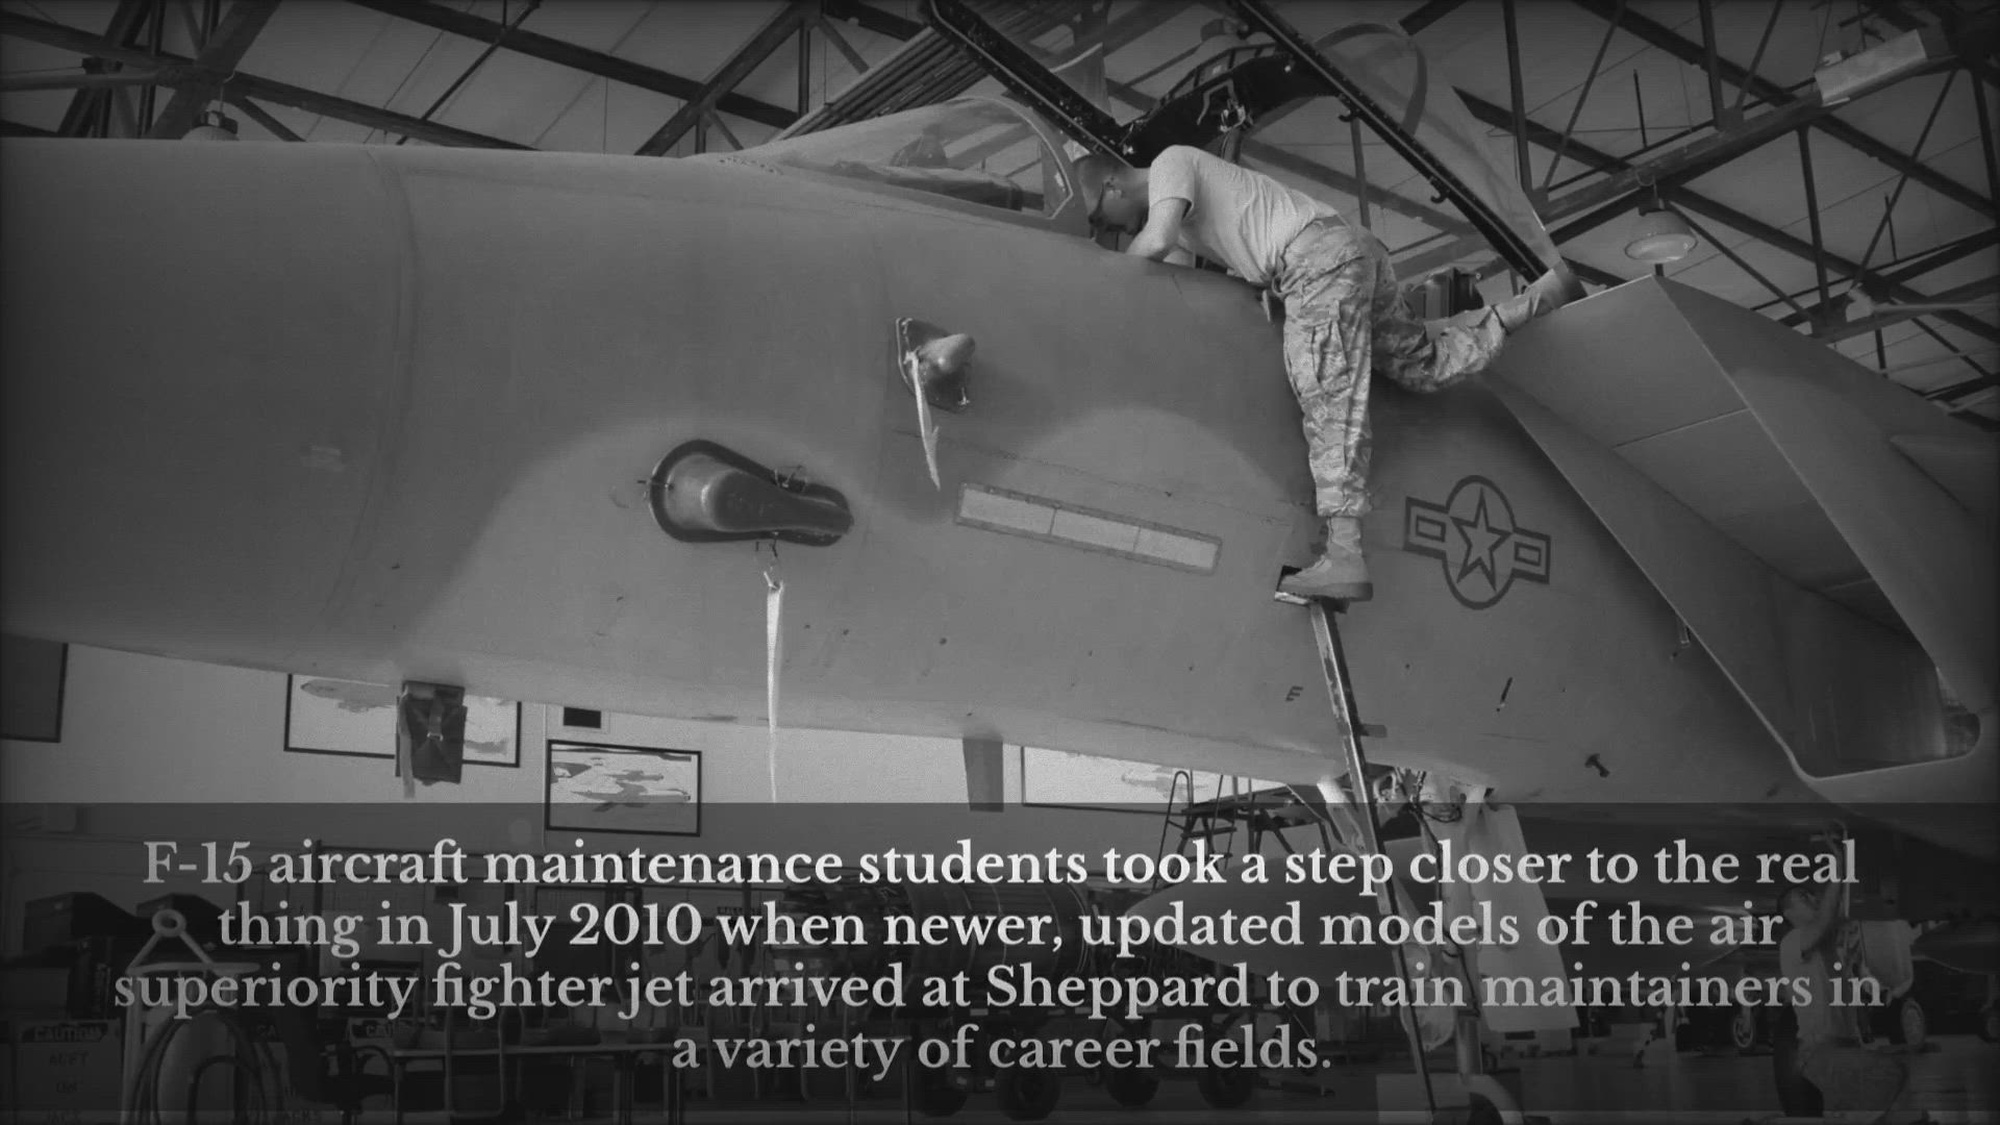 A weekly look at significant events during the 80-year history of Sheppard Air Force Base, Texas.